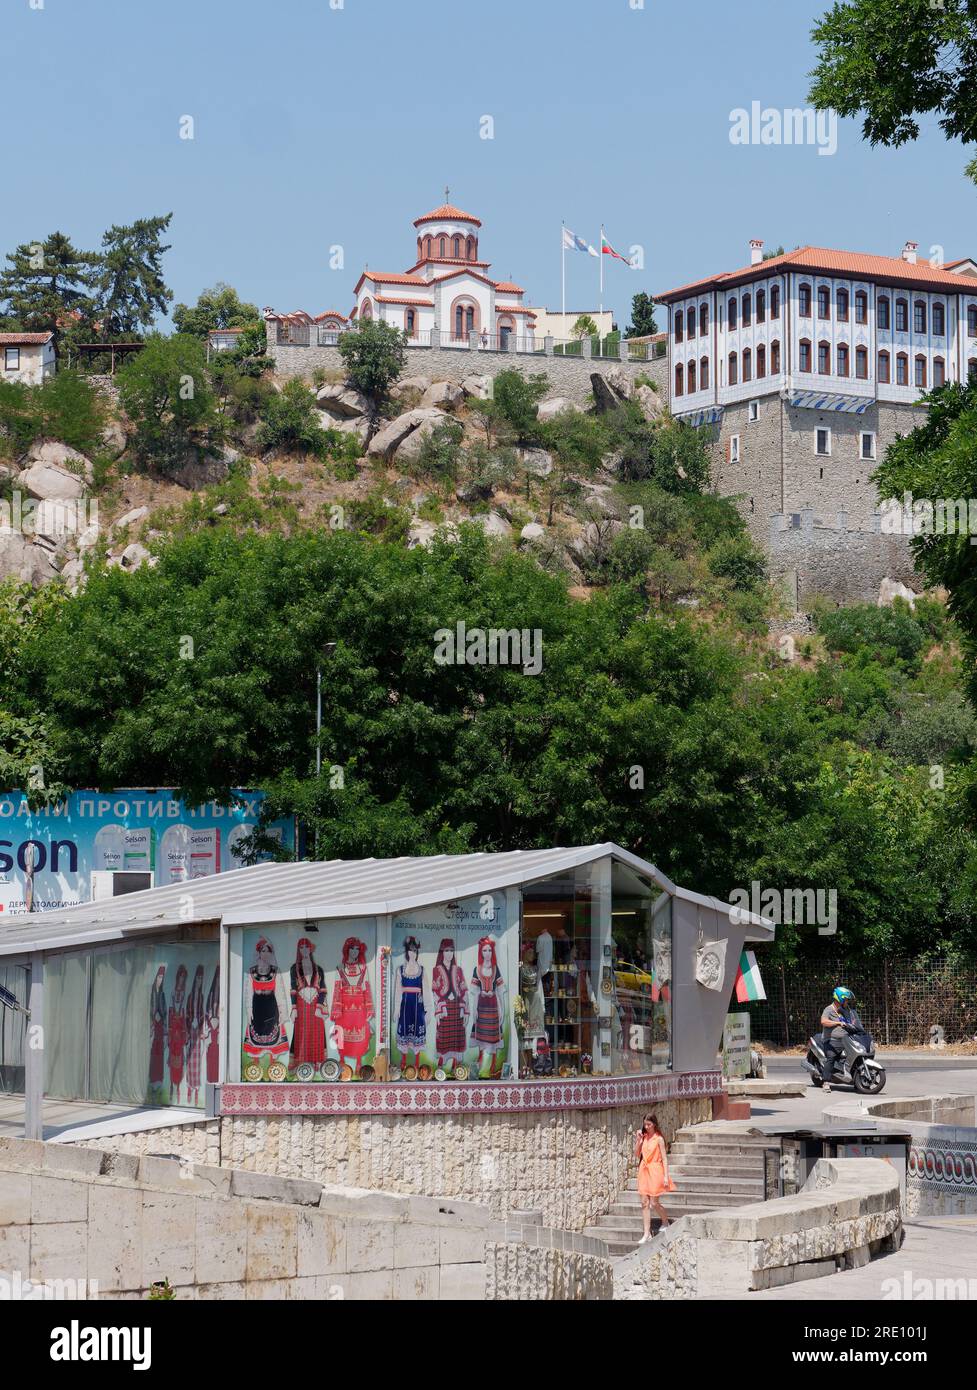 Plovdiv, Bulgaria. Subway entrance area and shop with illustrations f traditional clothing. Church in background on the hill. Stock Photo